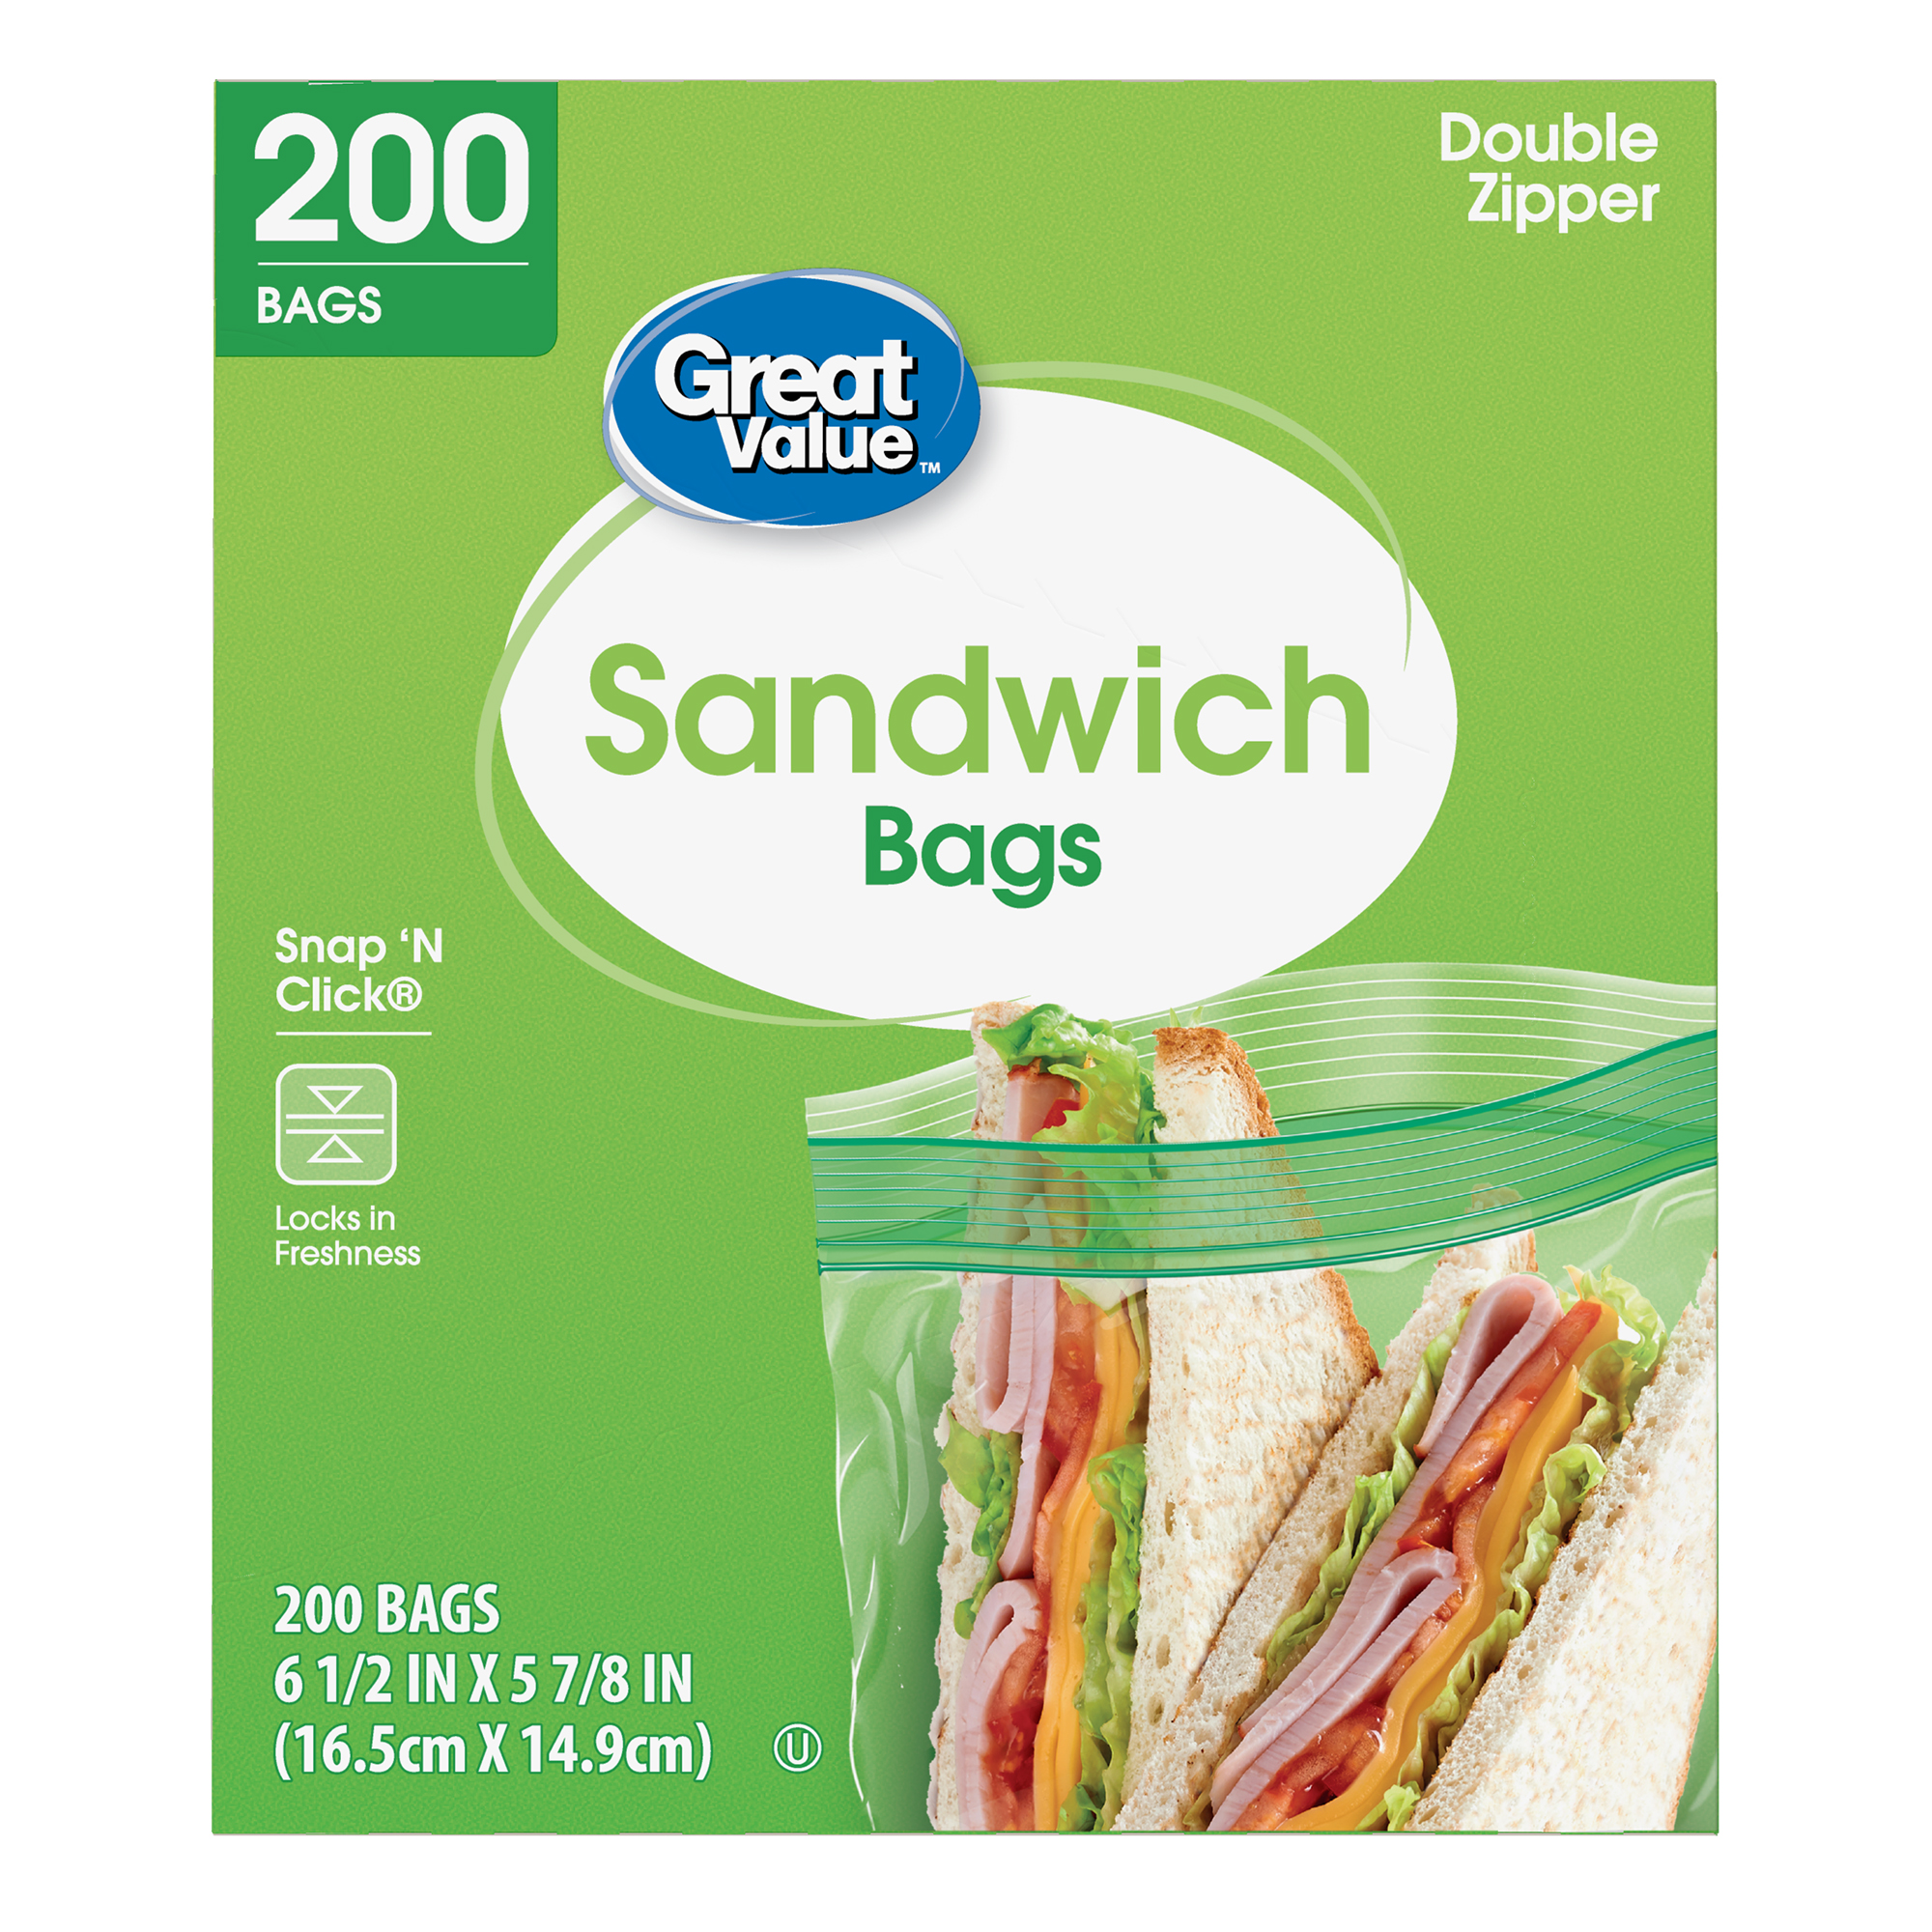 Great Value Double Zipper Sandwich Bags, 200 Count - image 1 of 10